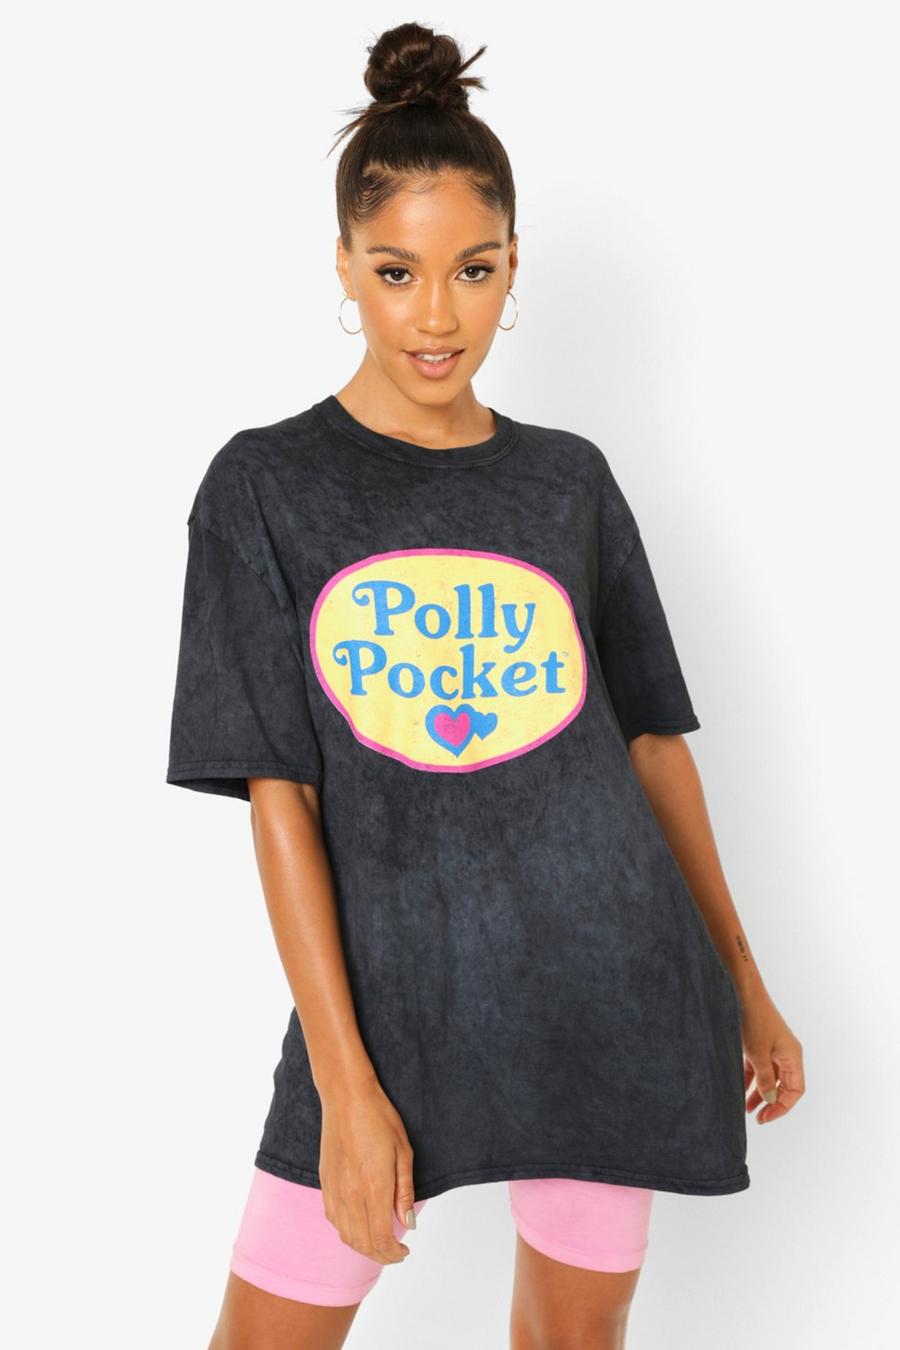 T-shirt ufficiale Polly Pocket lavaggio acido, Charcoal image number 1